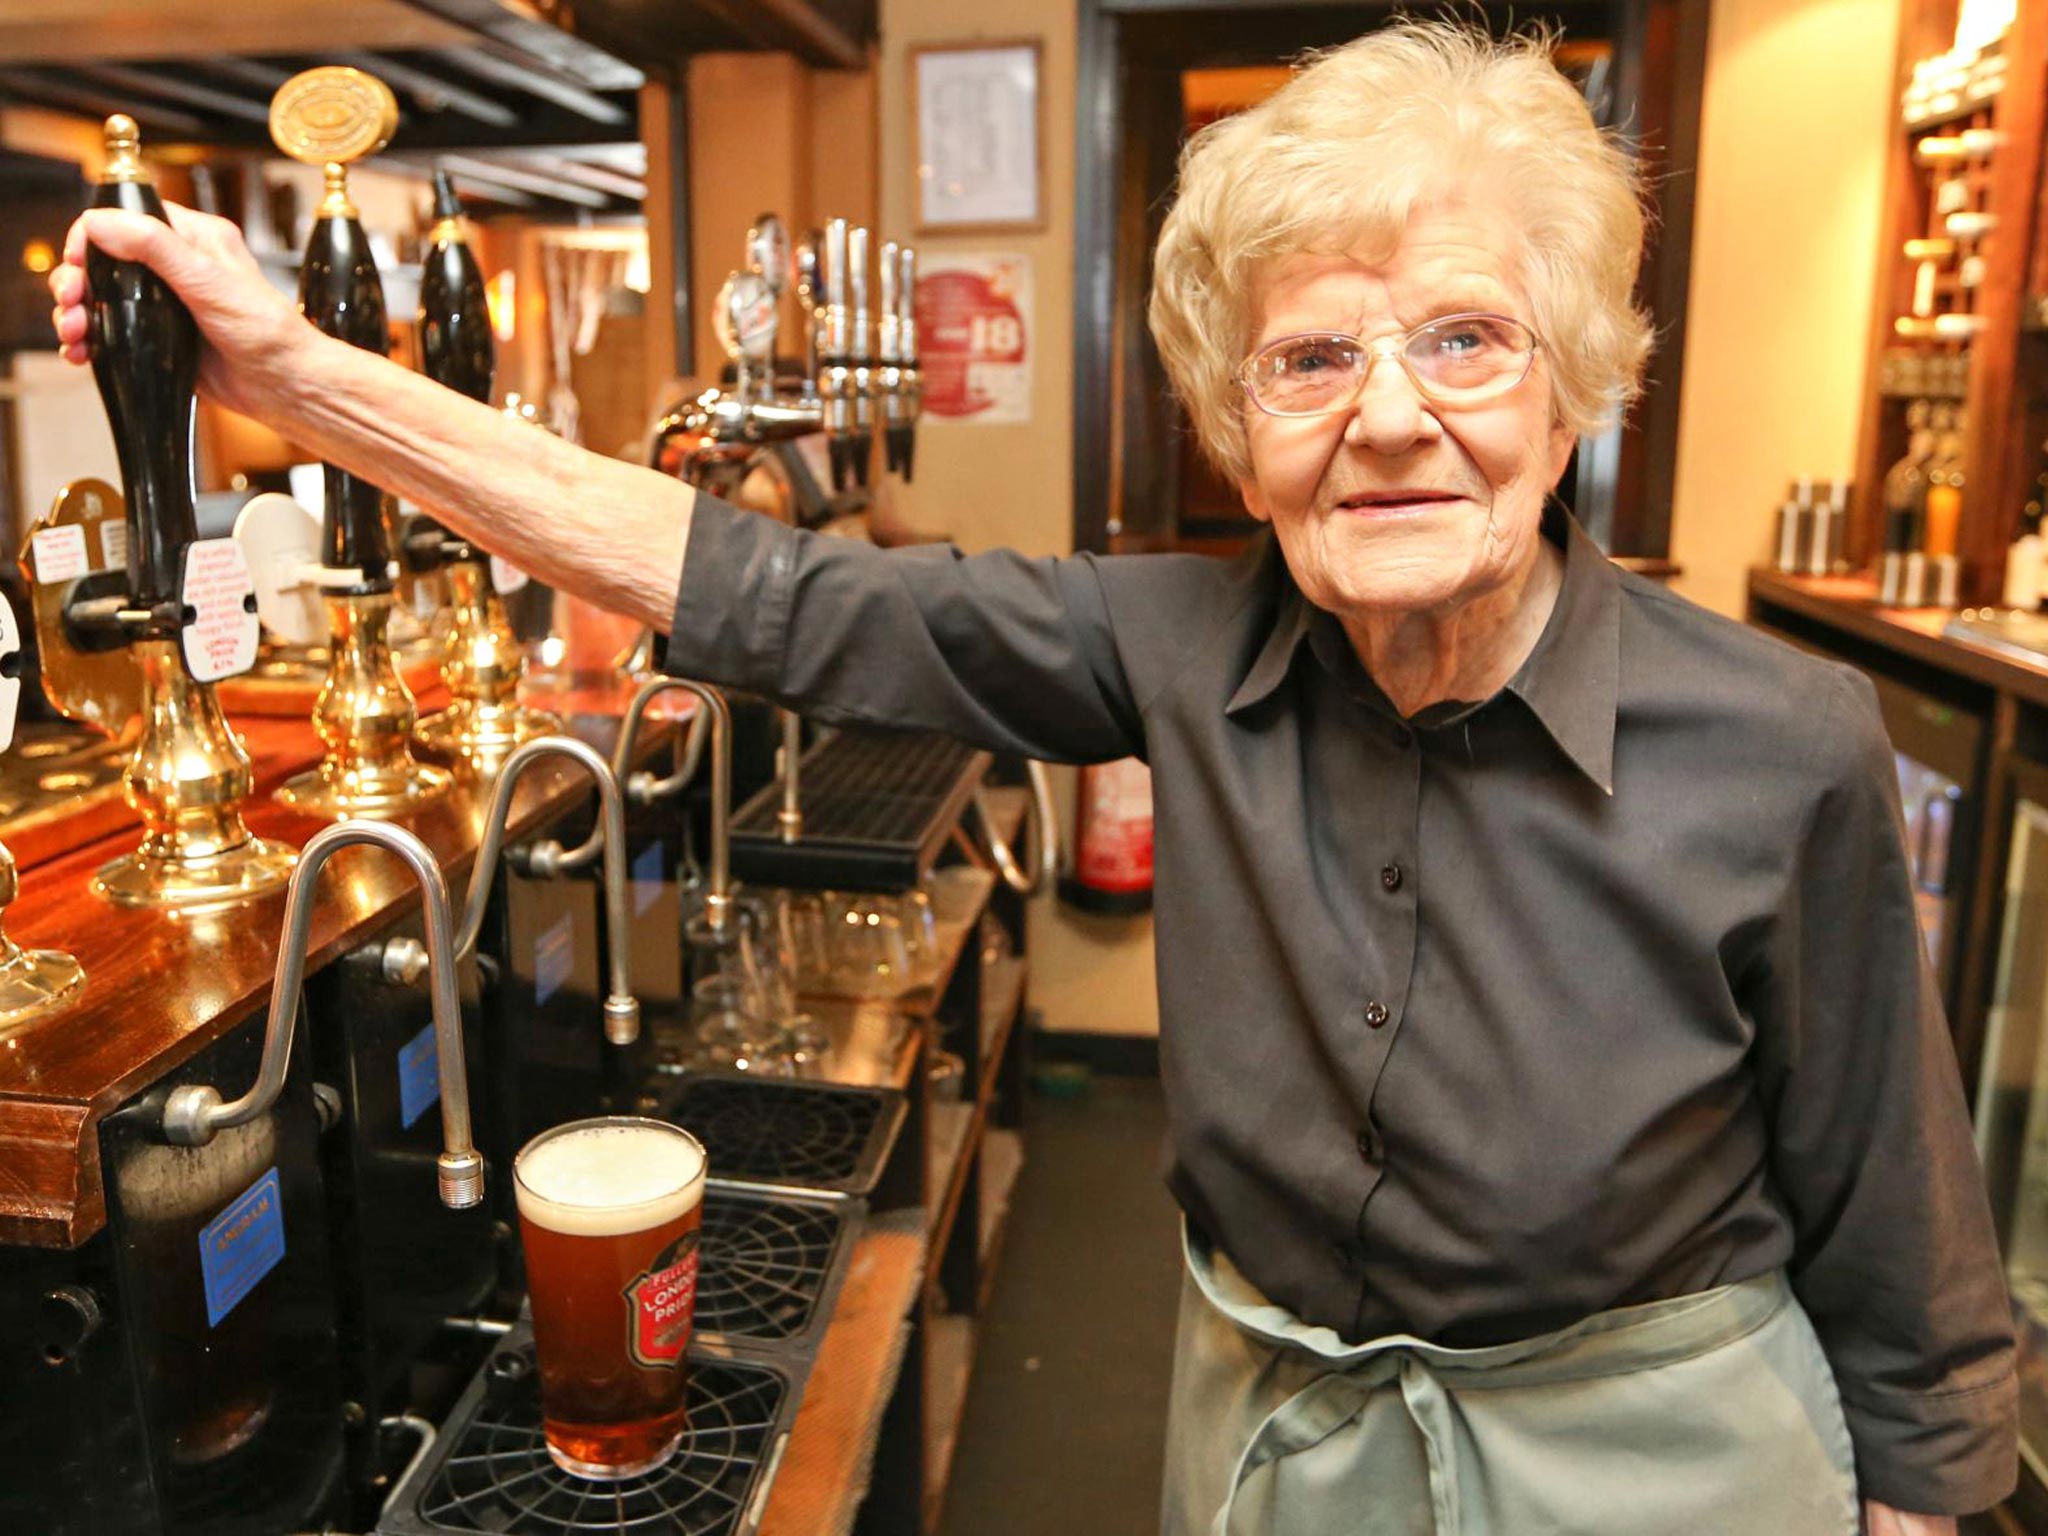 Dolly, from Wendover, Buckinghamshire, was known as the “oldest barmaid in the world”